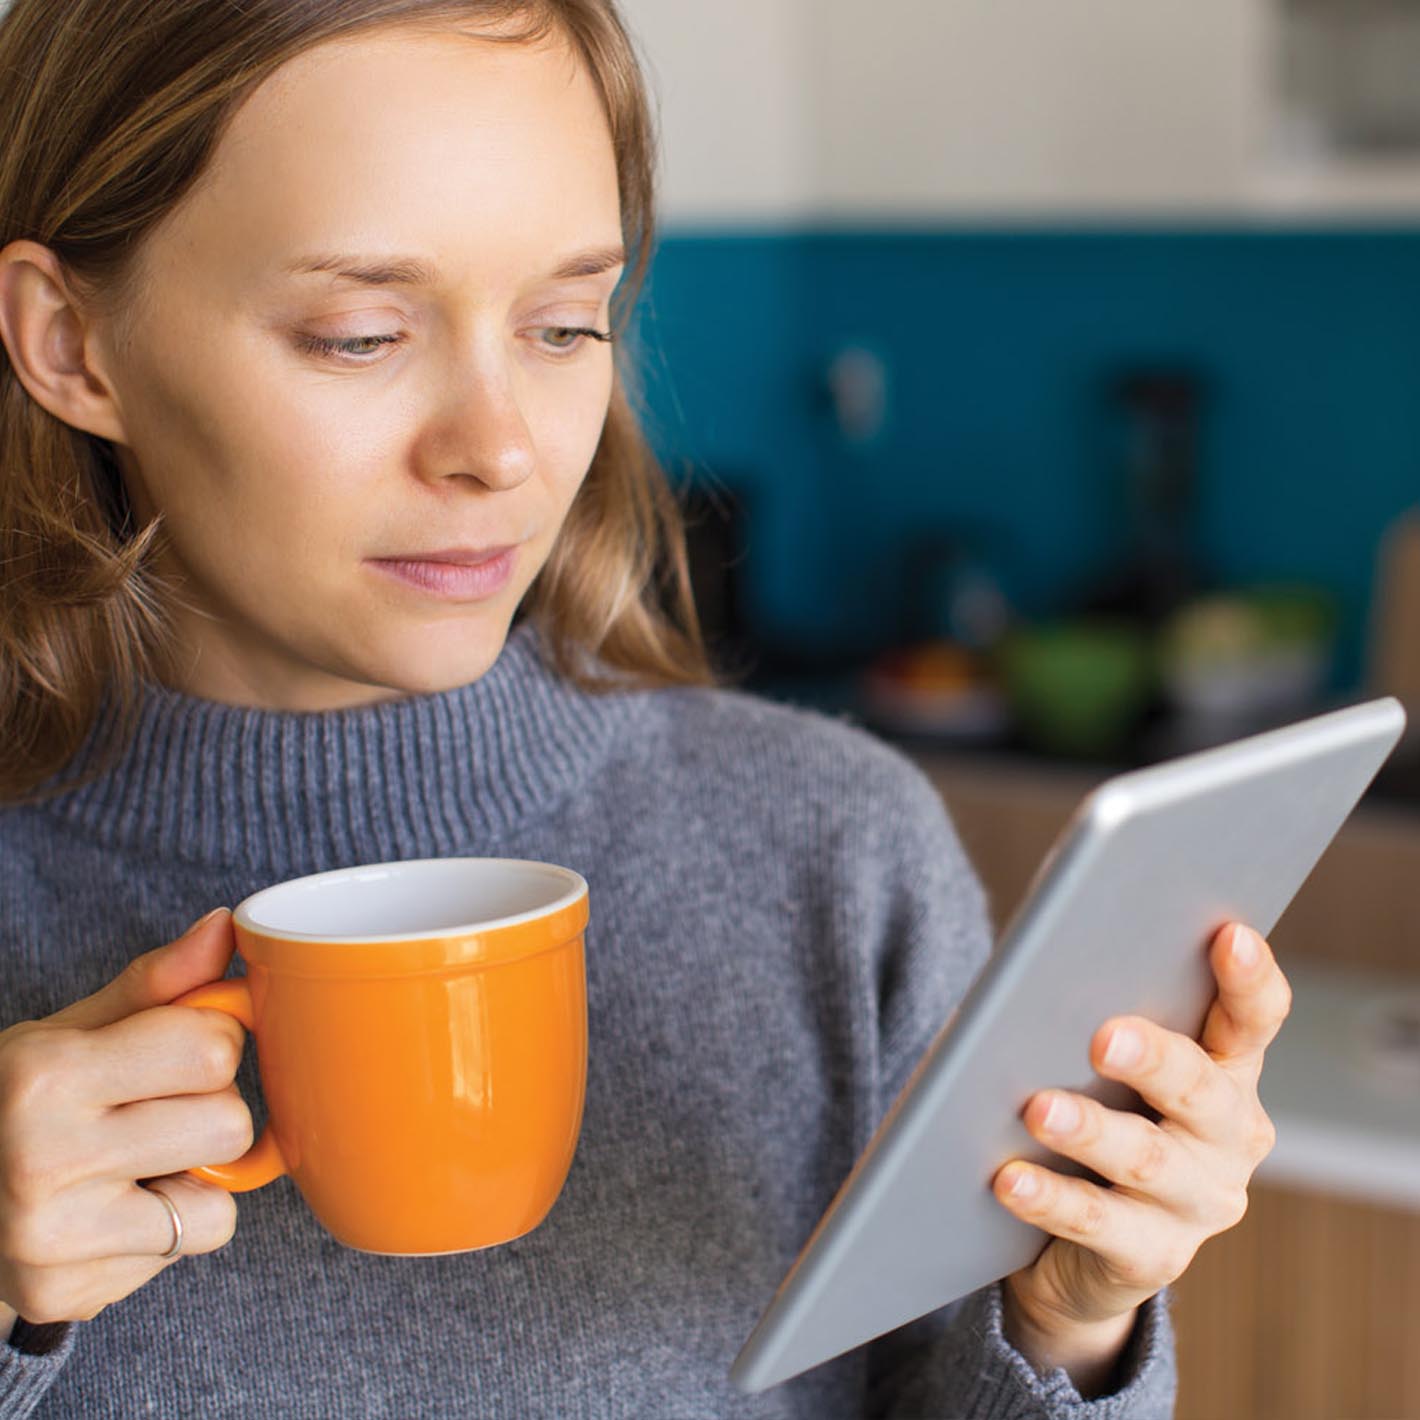 woman holding orange mug and looking at tablet in kitchen